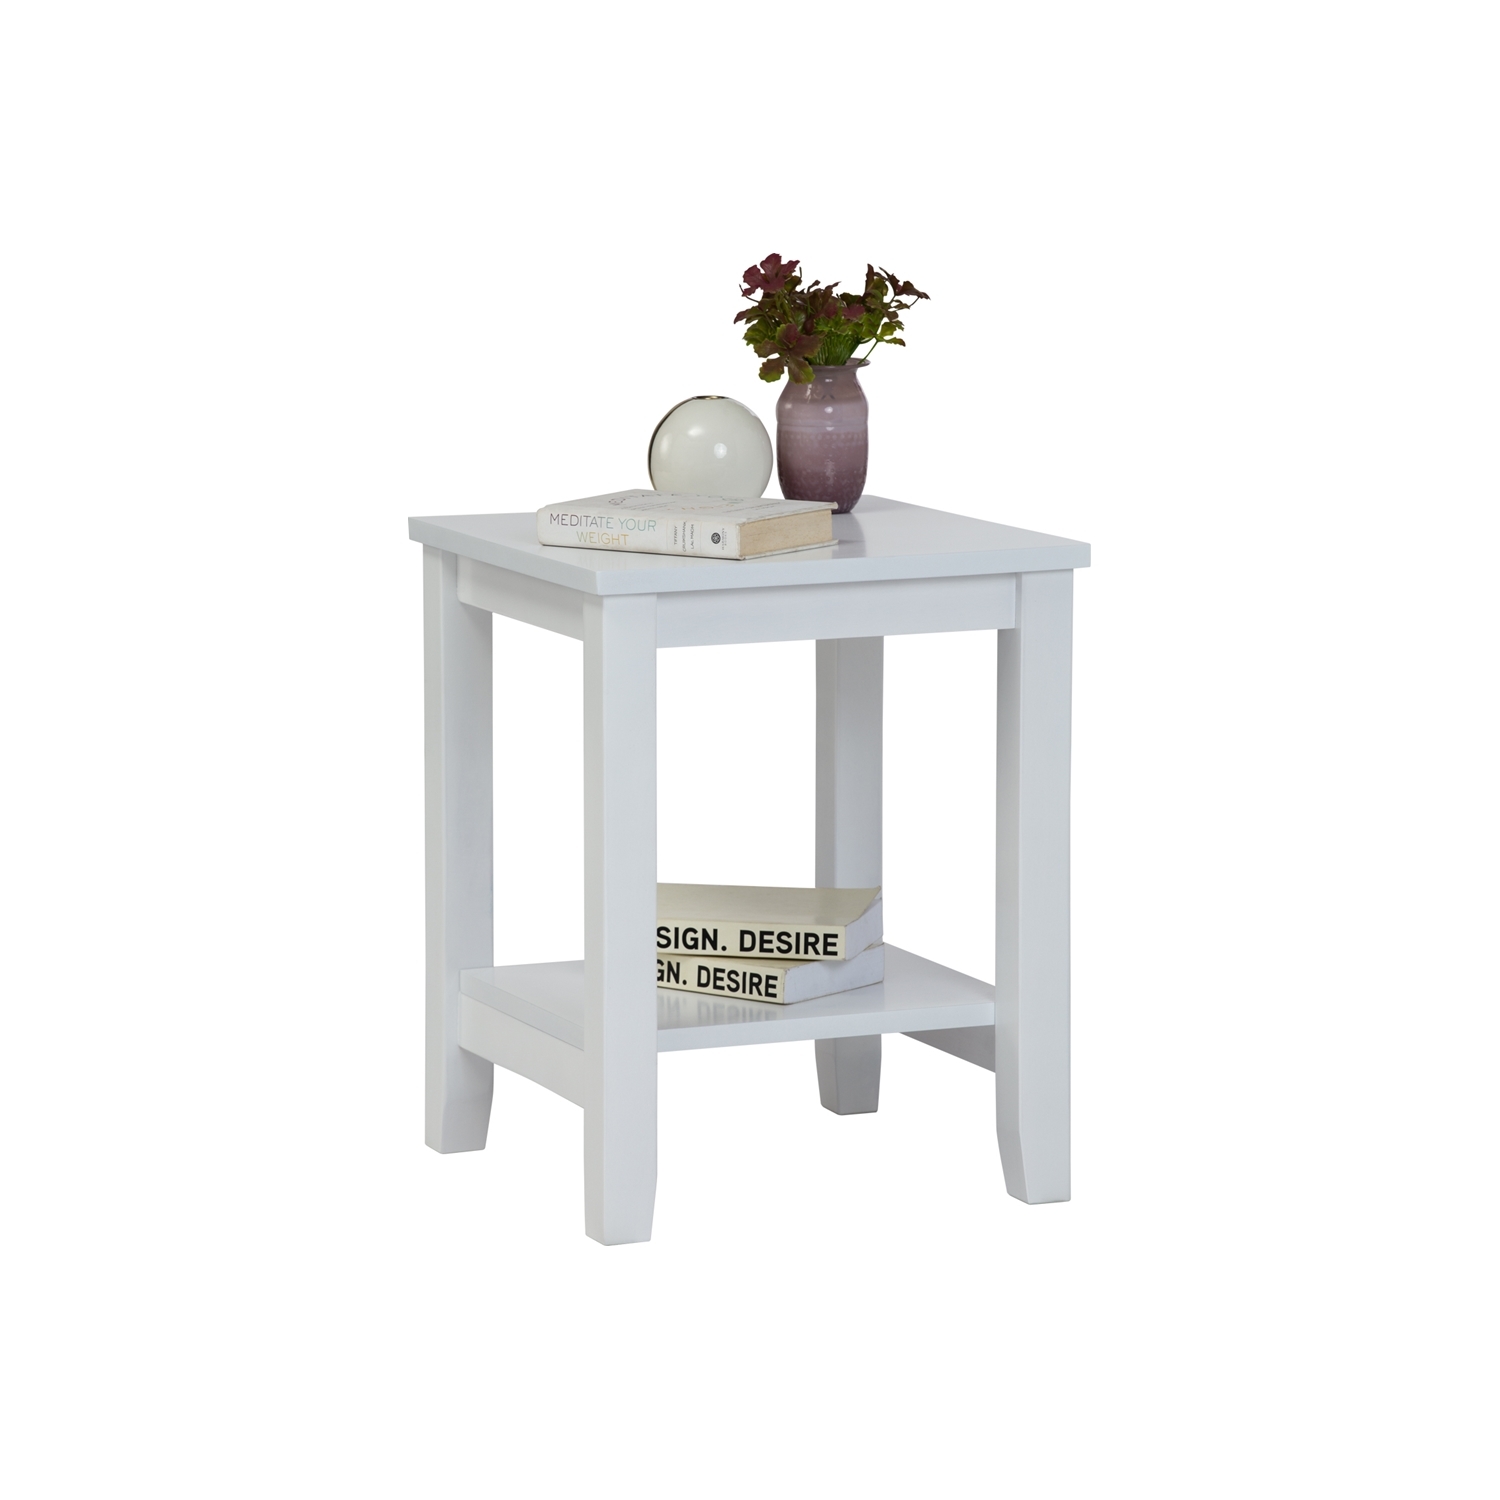 AIMIZON Flone bedside table in White colour